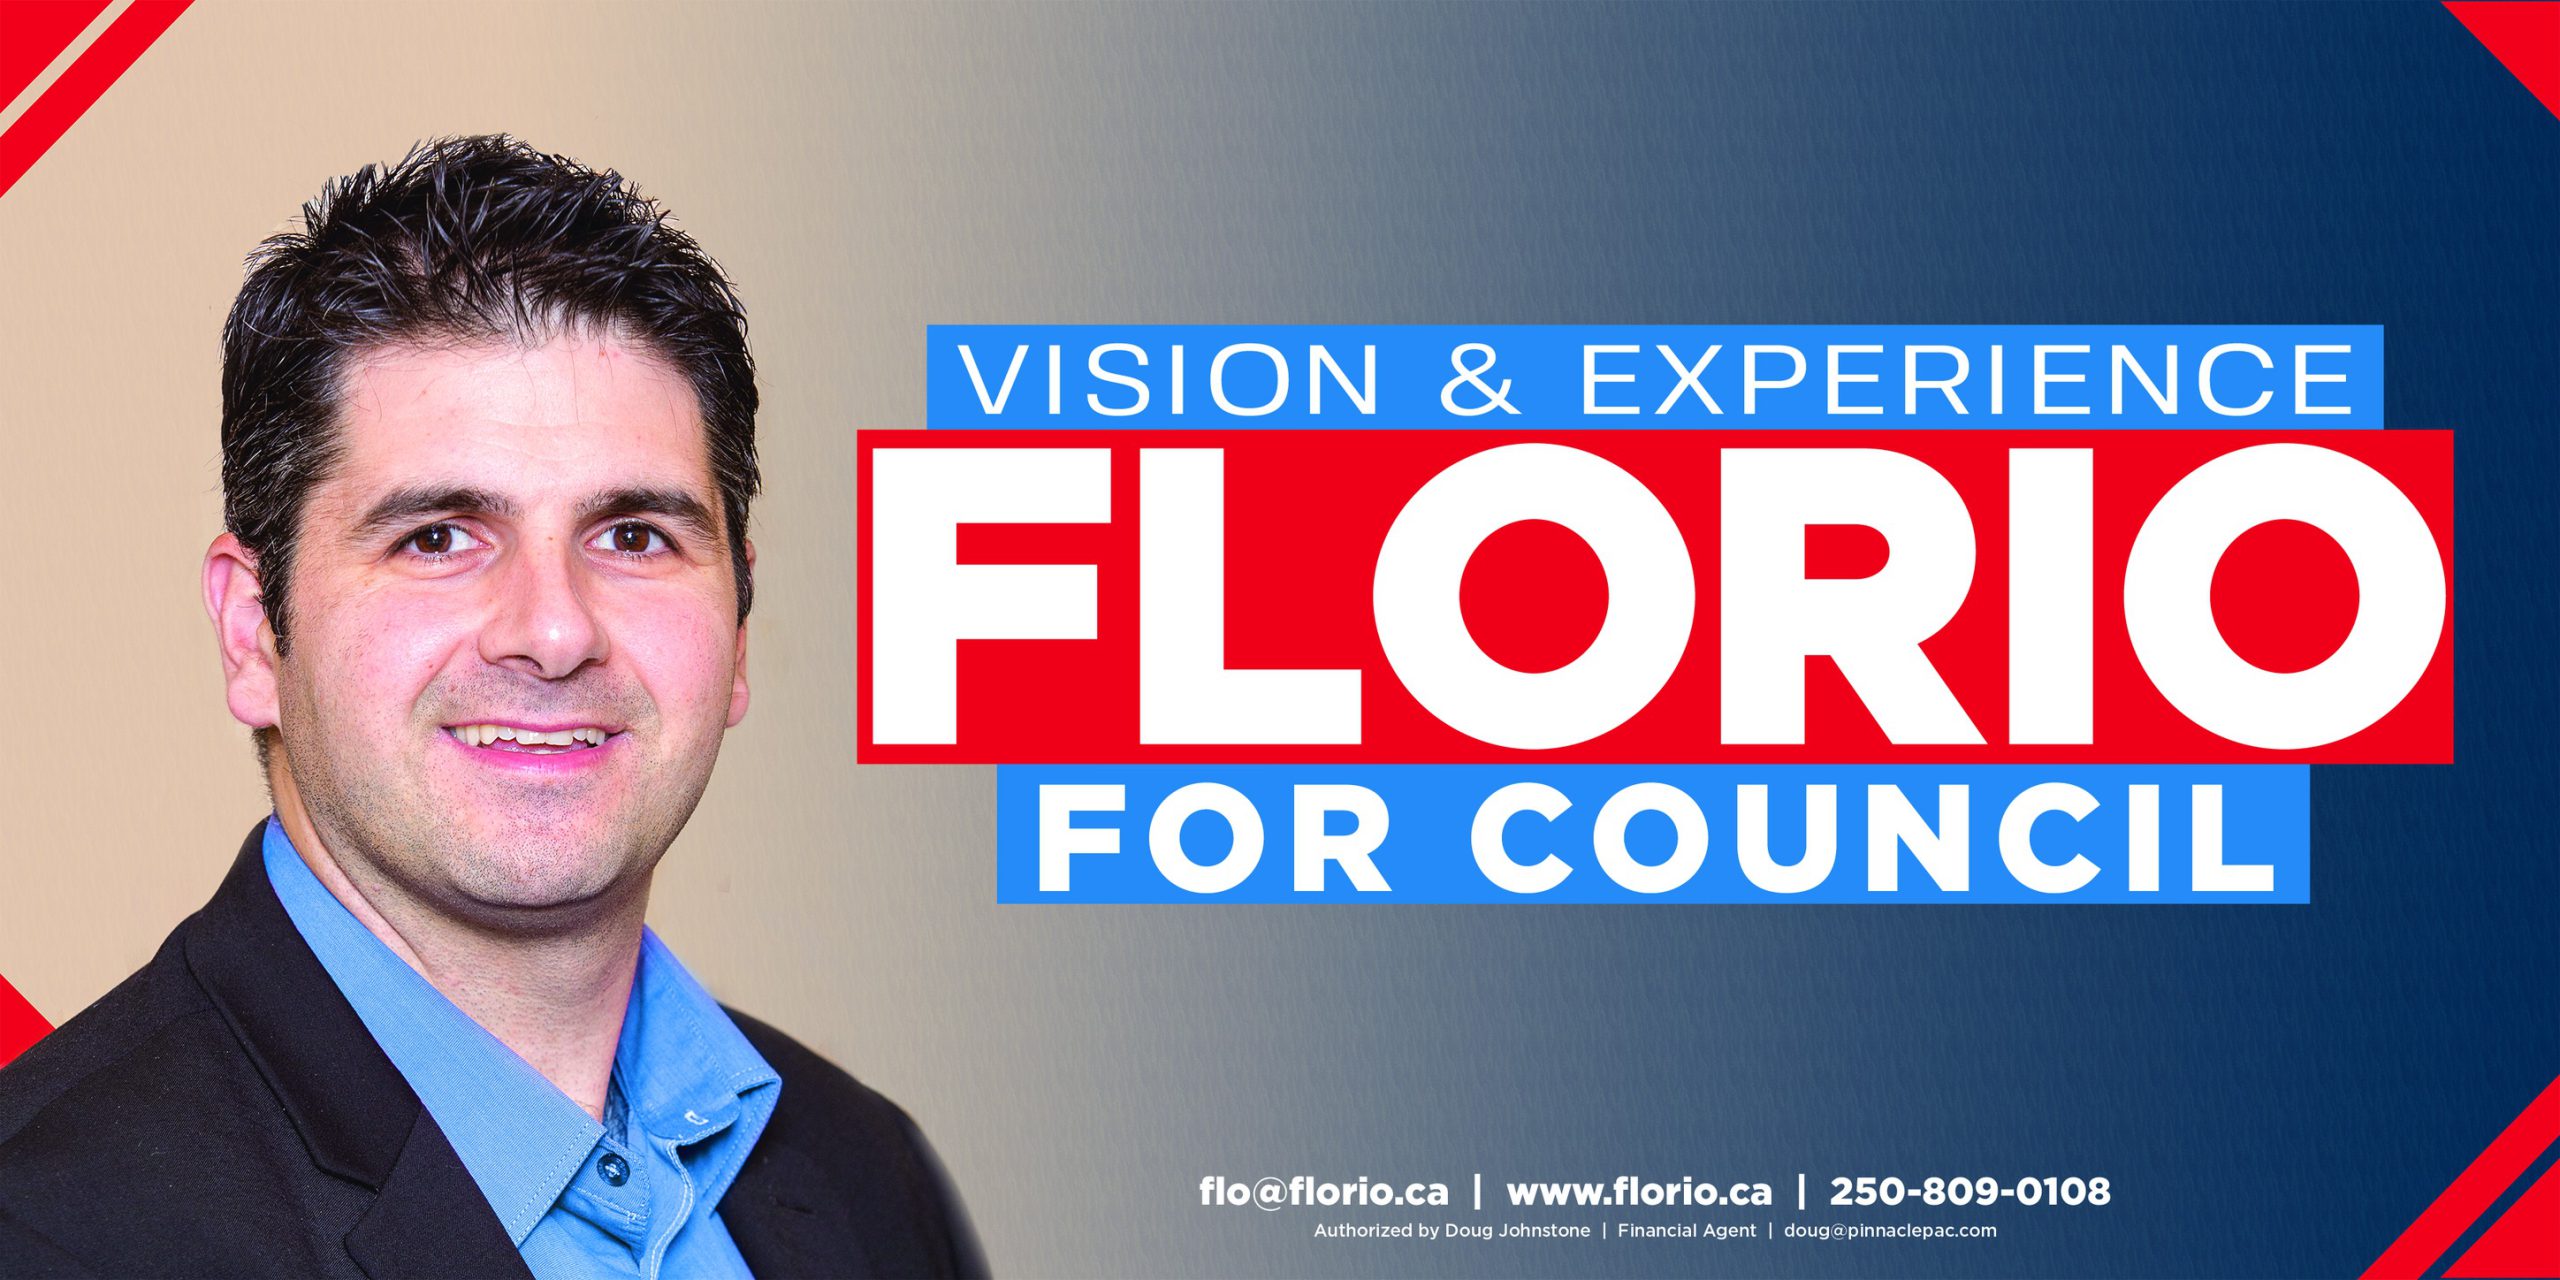 Council Candidate Florio Vassilakakis - in his own words